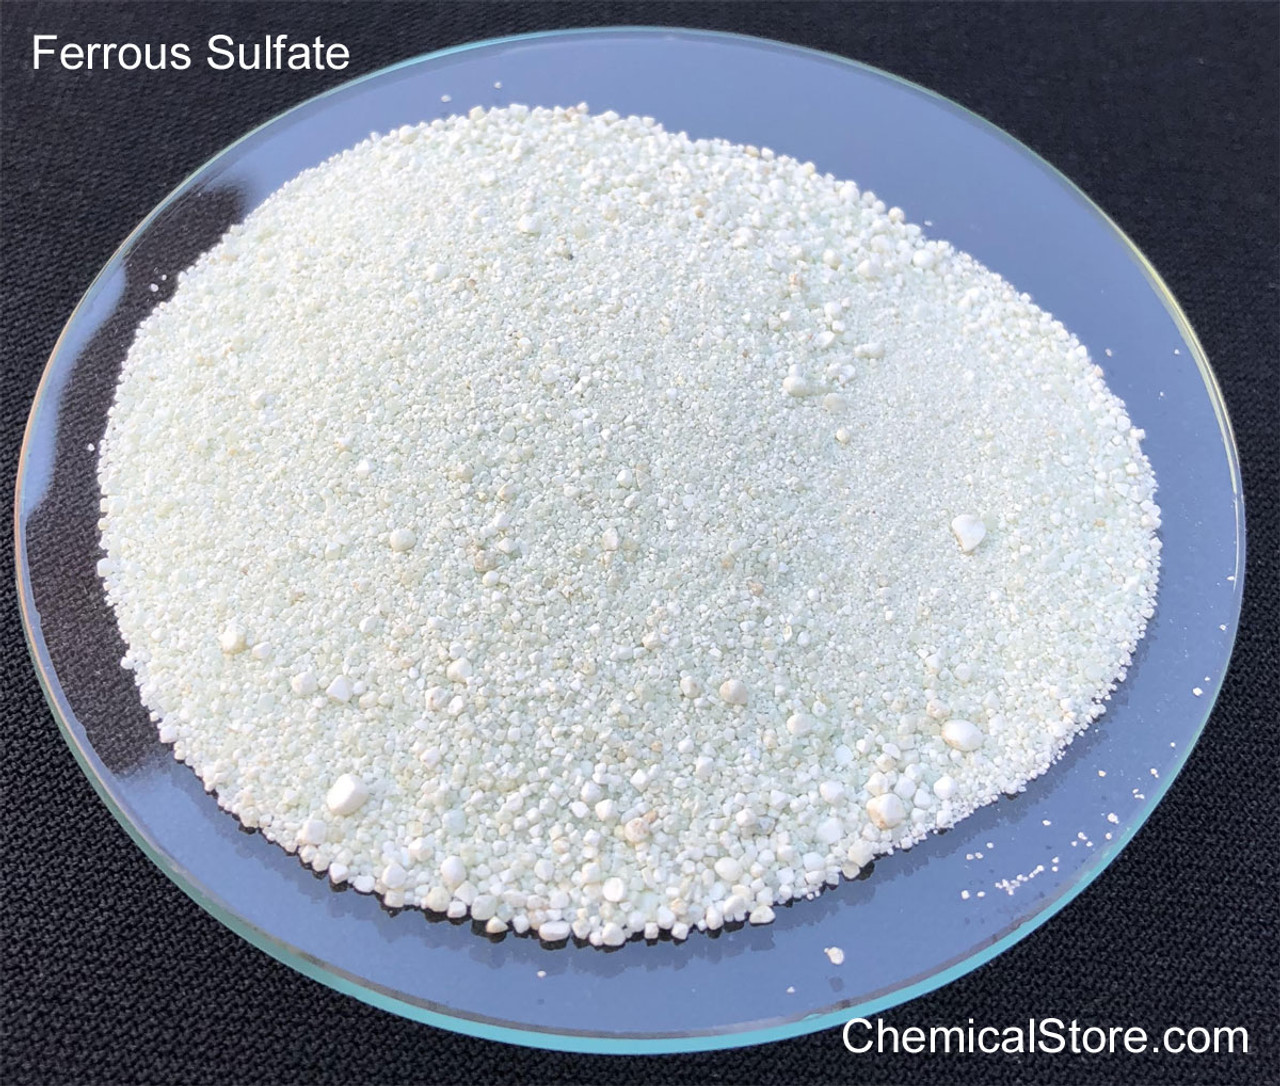 Dry ferrous sulphate is almost white in bright light.